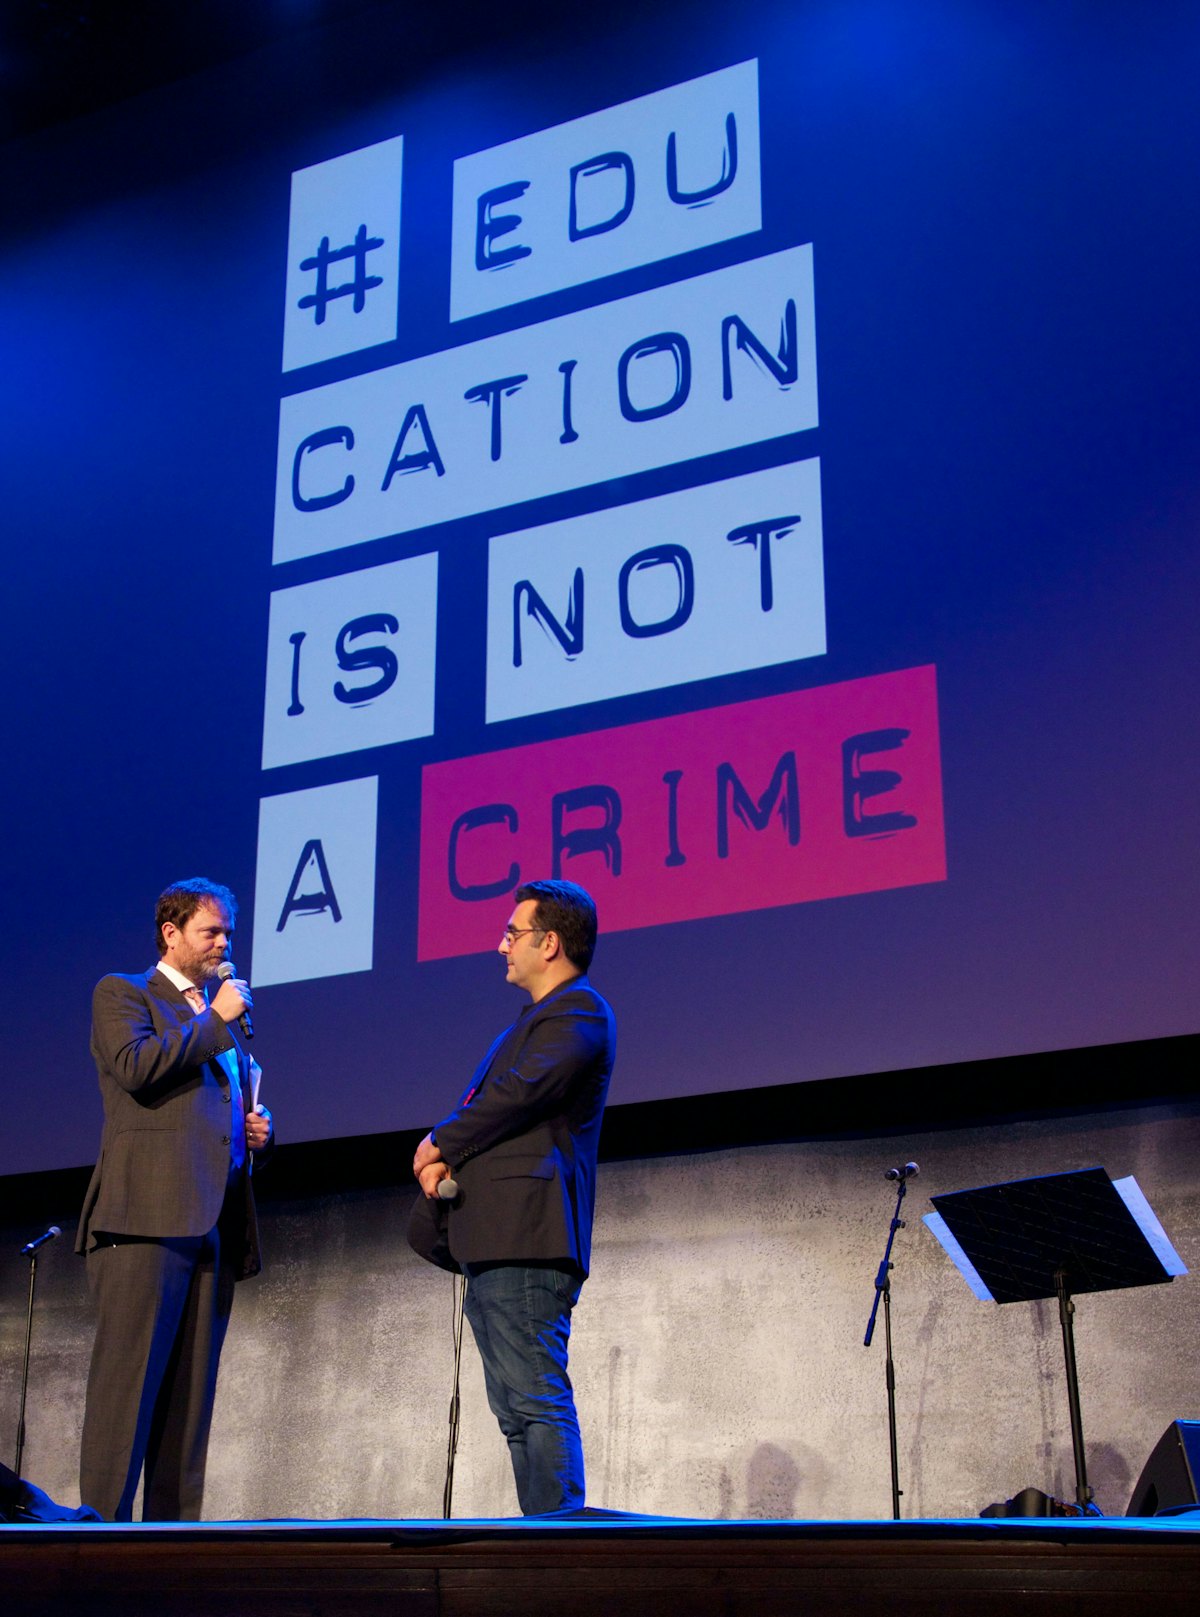 Actor Rainn Wilson converses with journalist and filmmaker Maziar Bahari at the Education is Not a Crime – Live 2015 event in Los Angeles on 27 February 2015.